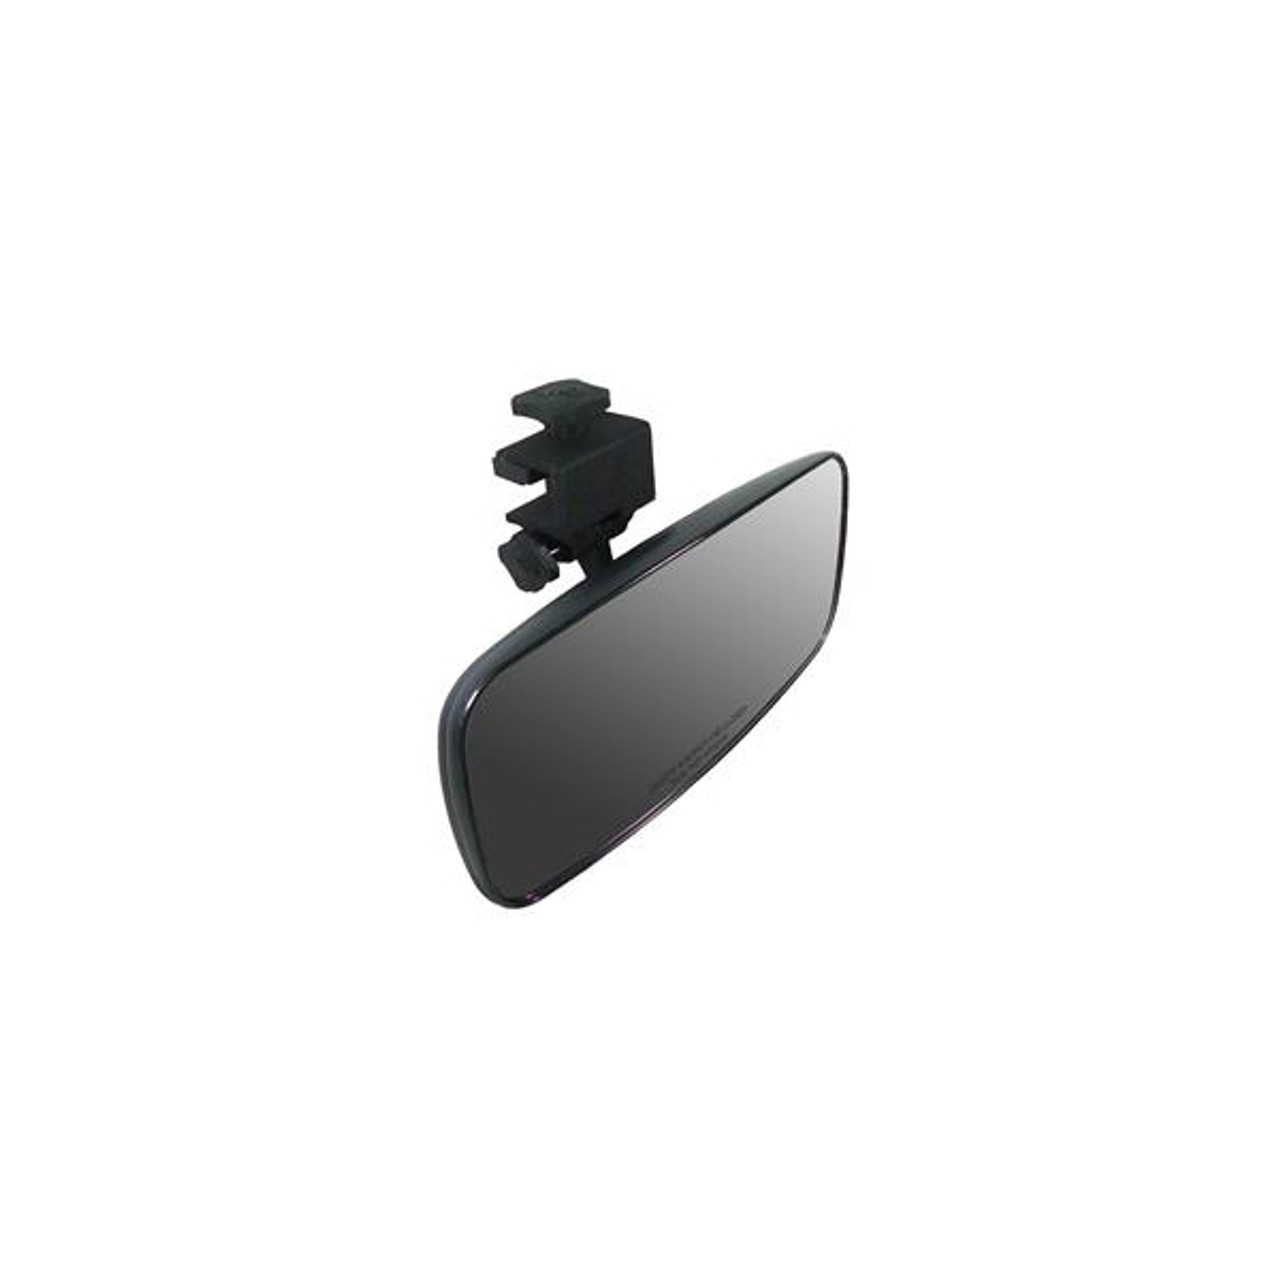 Universal 7X20 Multi lens Rear View Side Mirror with Bracket for Boat-Ski-Marine 